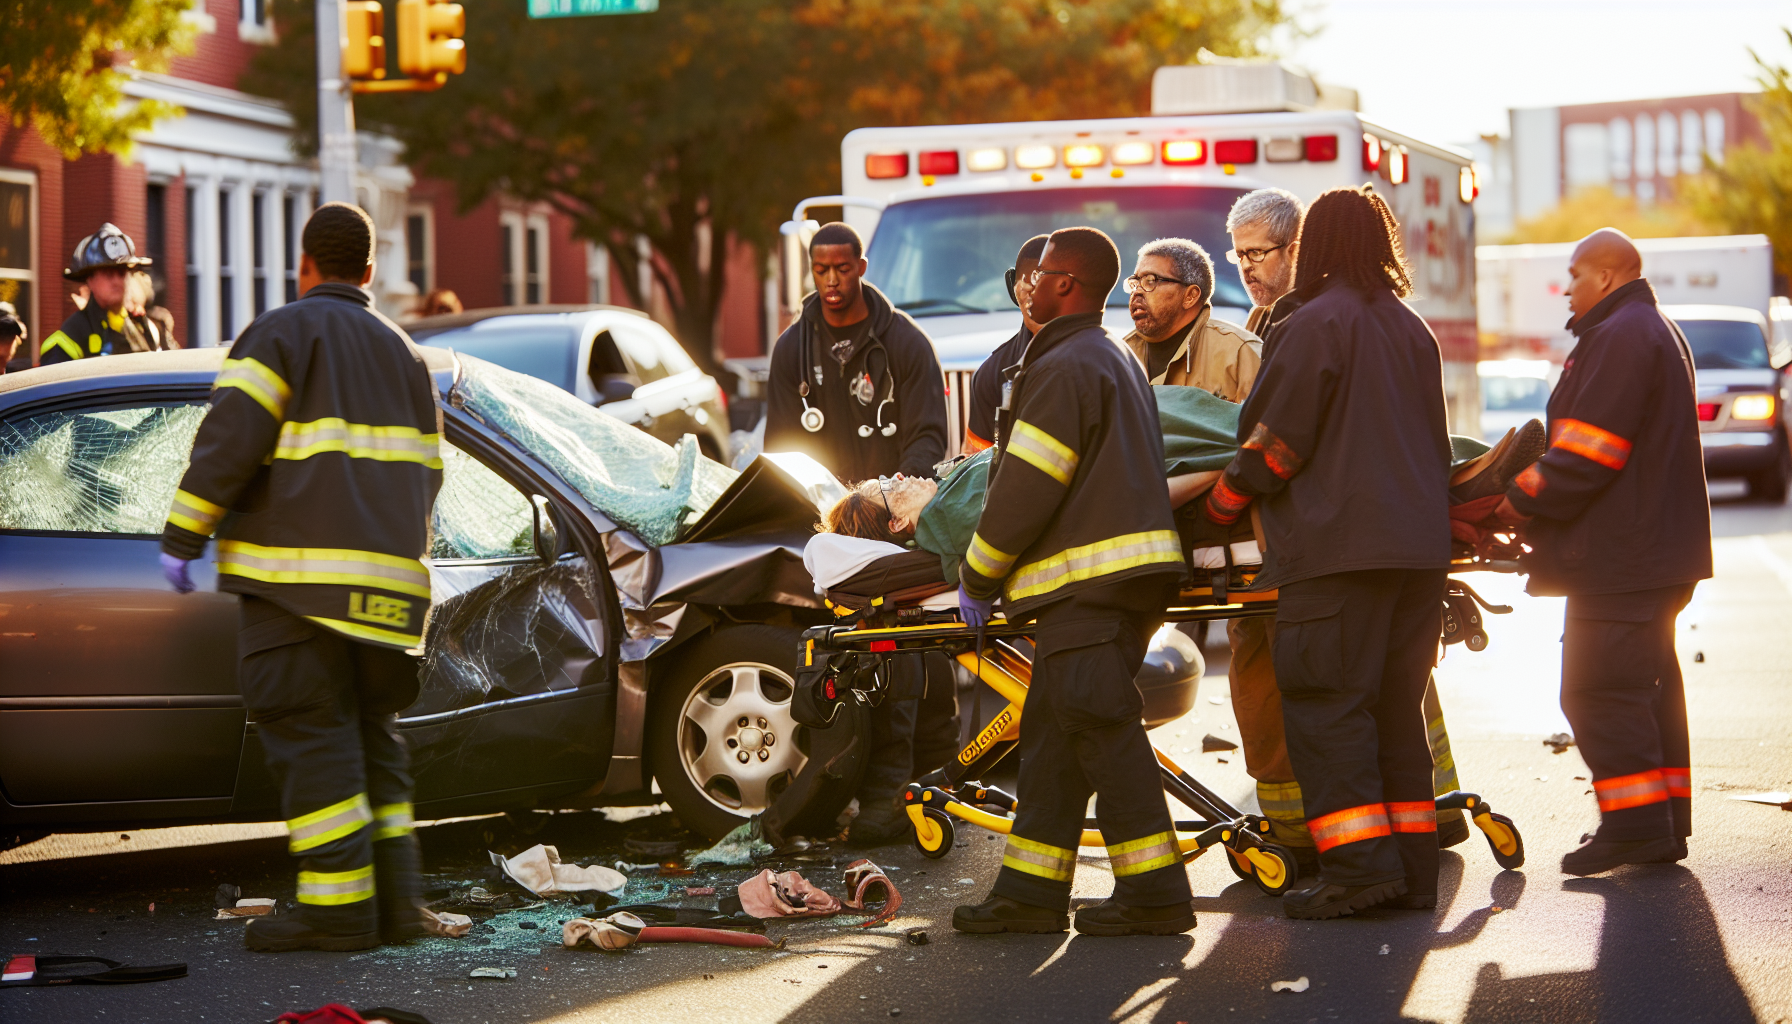 A car accident scene with emergency responders and injured individuals representing types of personal injury cases handled by Jackson accident lawyers.